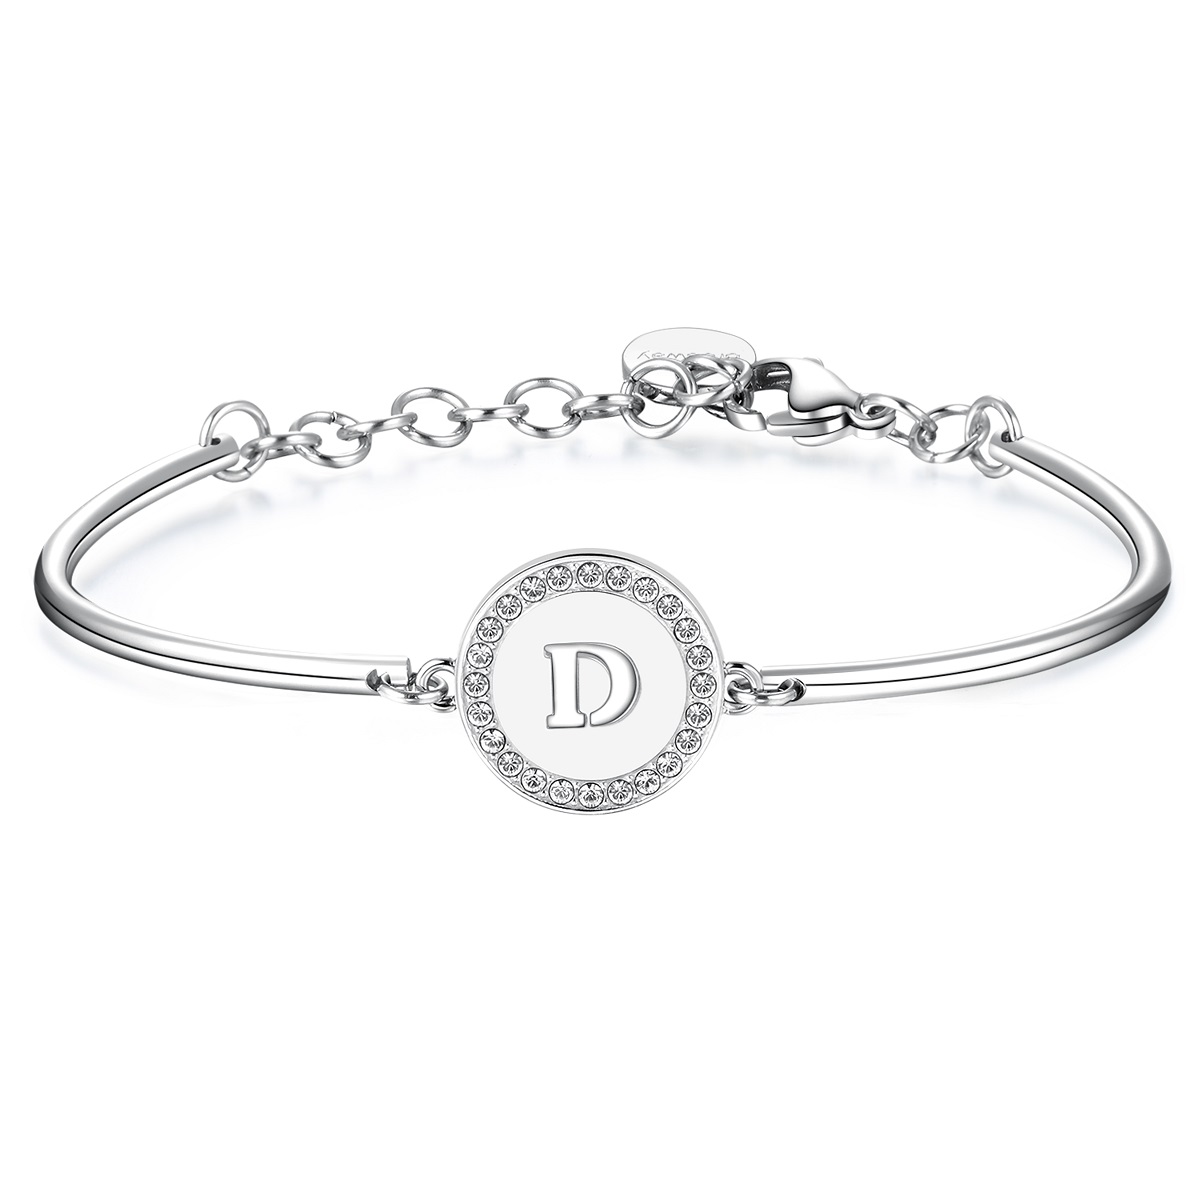 Brosway initial letter chakra bracelet with zircons